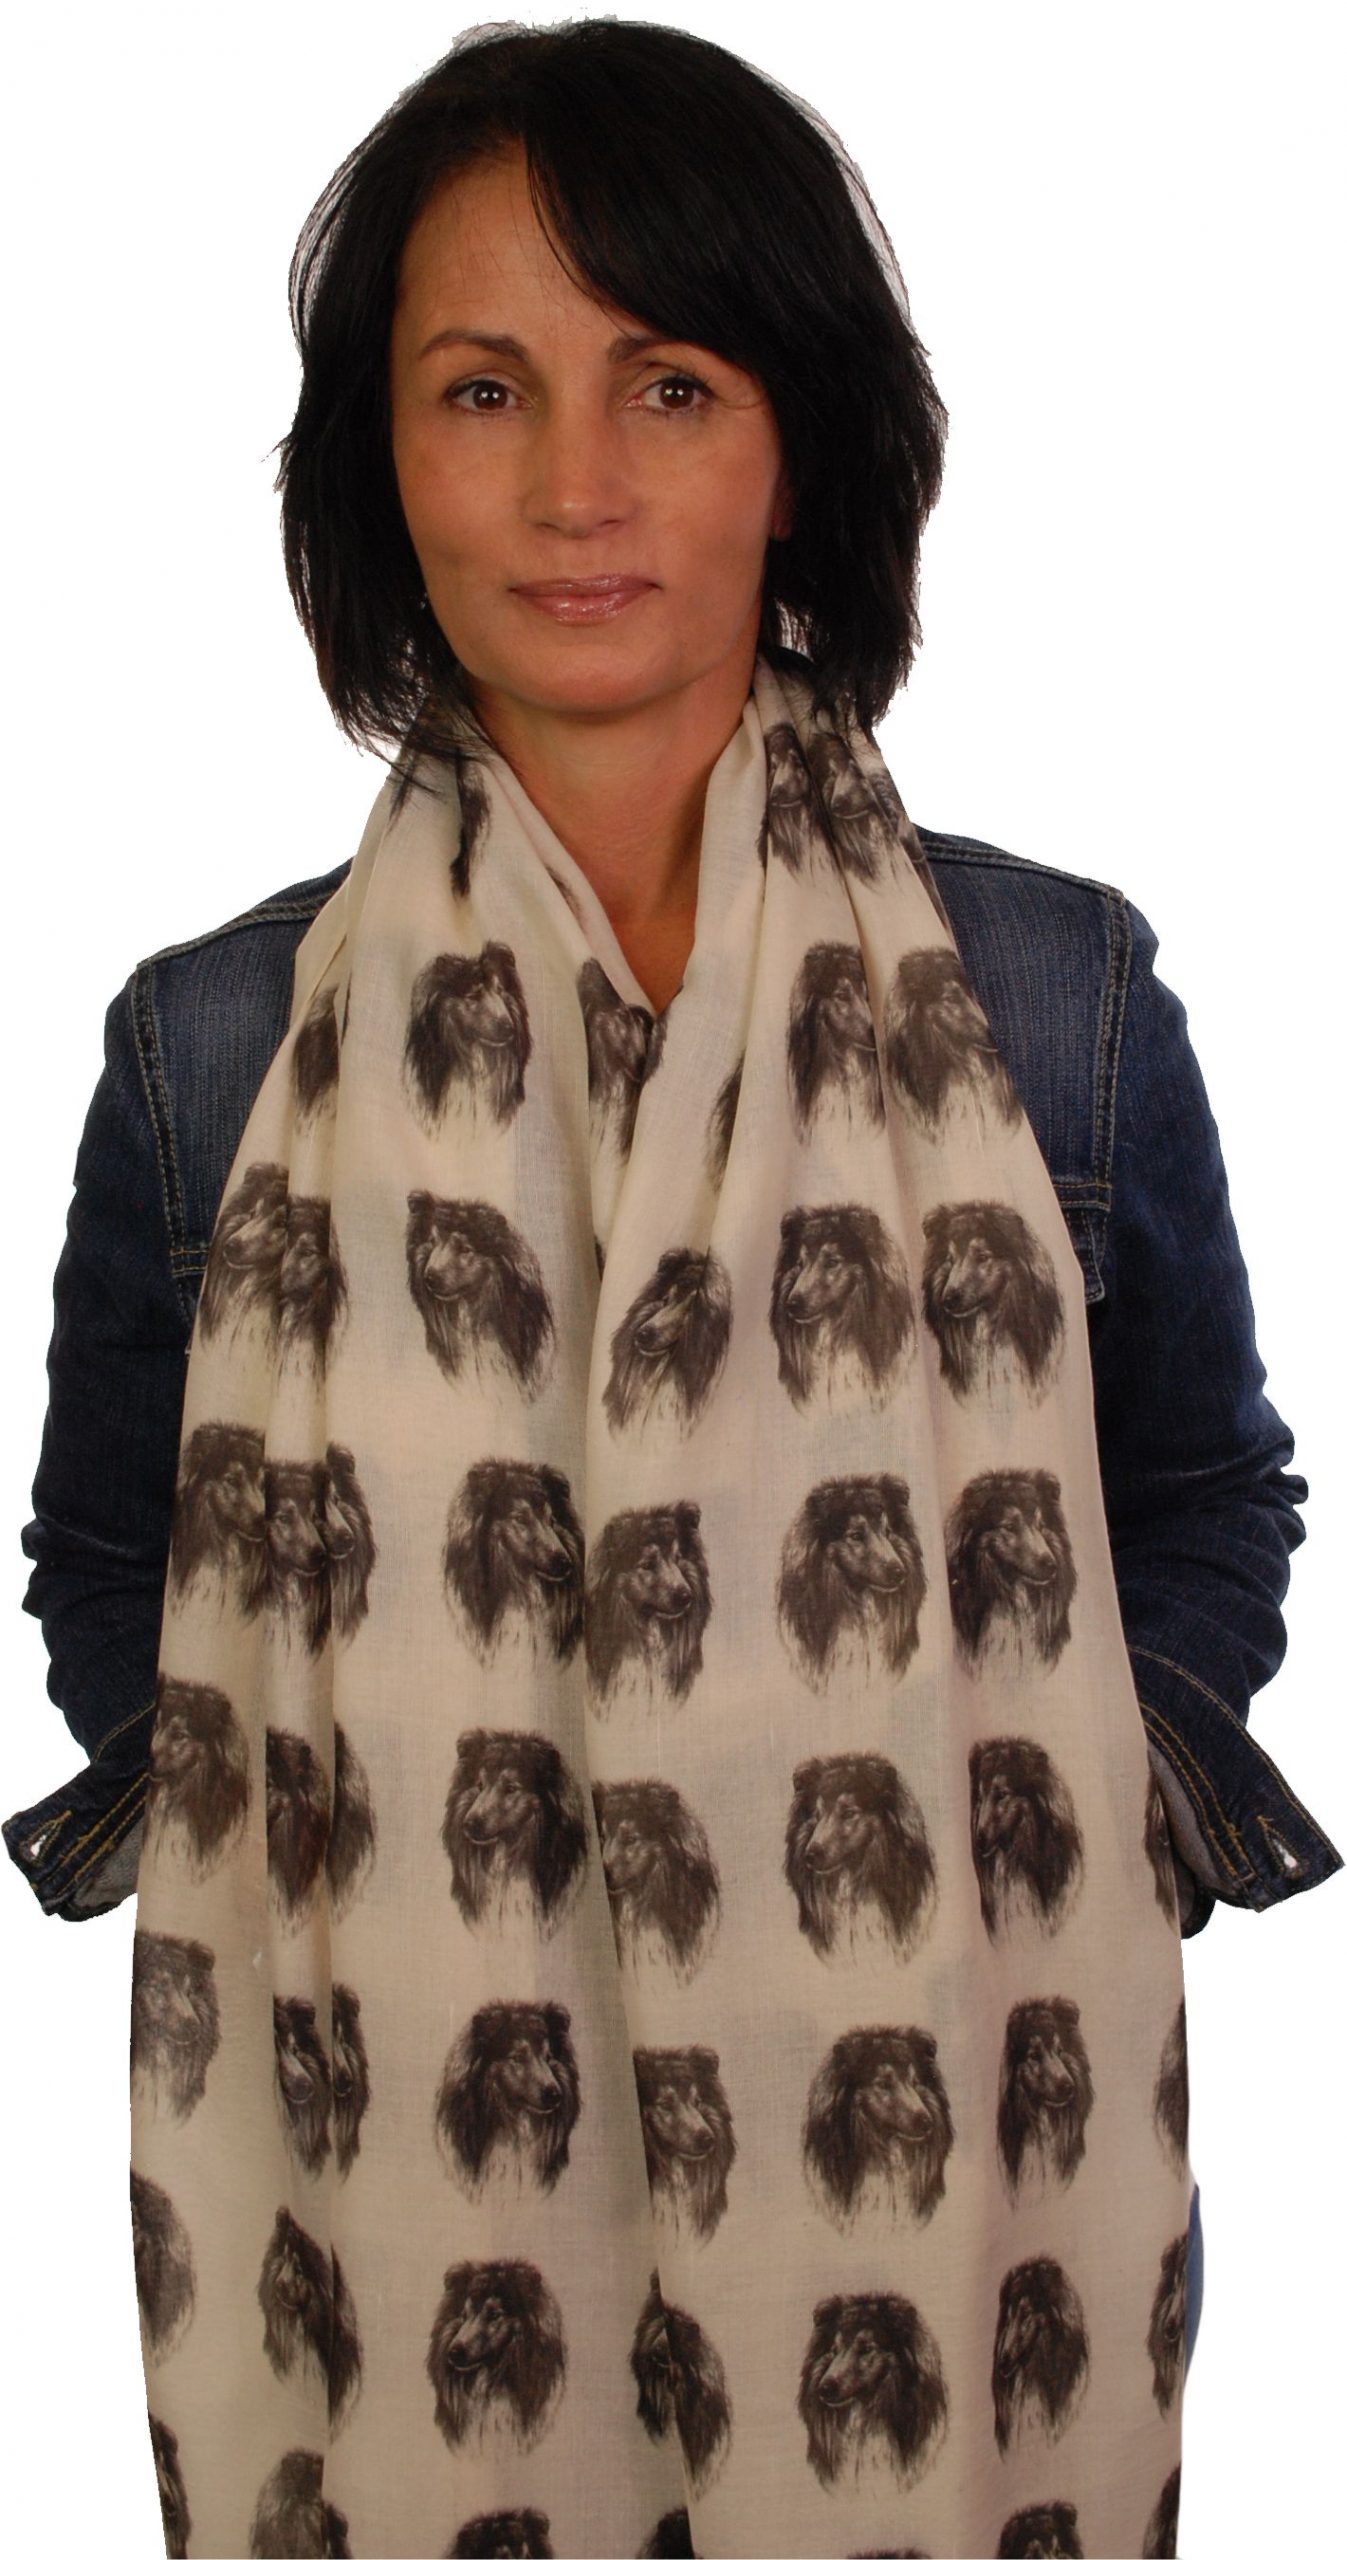 Mike Sibley Rough Collie licensed design ladies fashion scarf